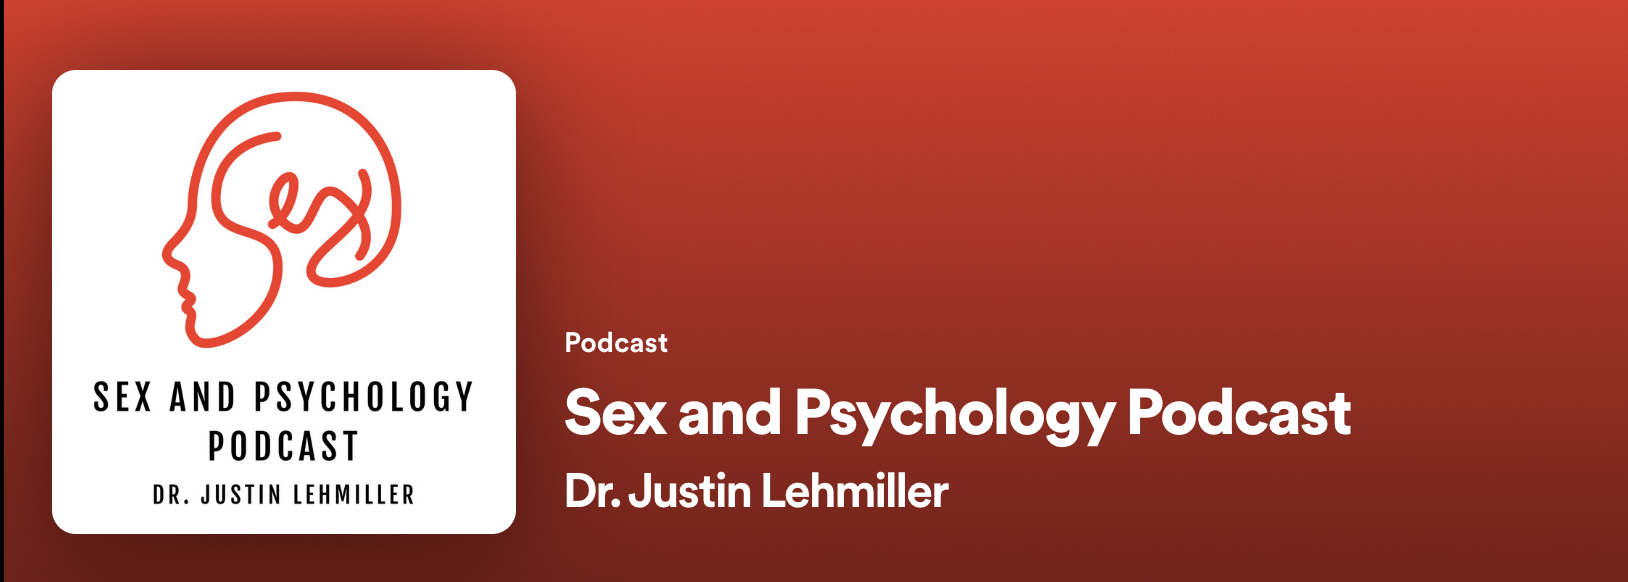 How To Use the Sex and Psychology Podcast in Your Classroom